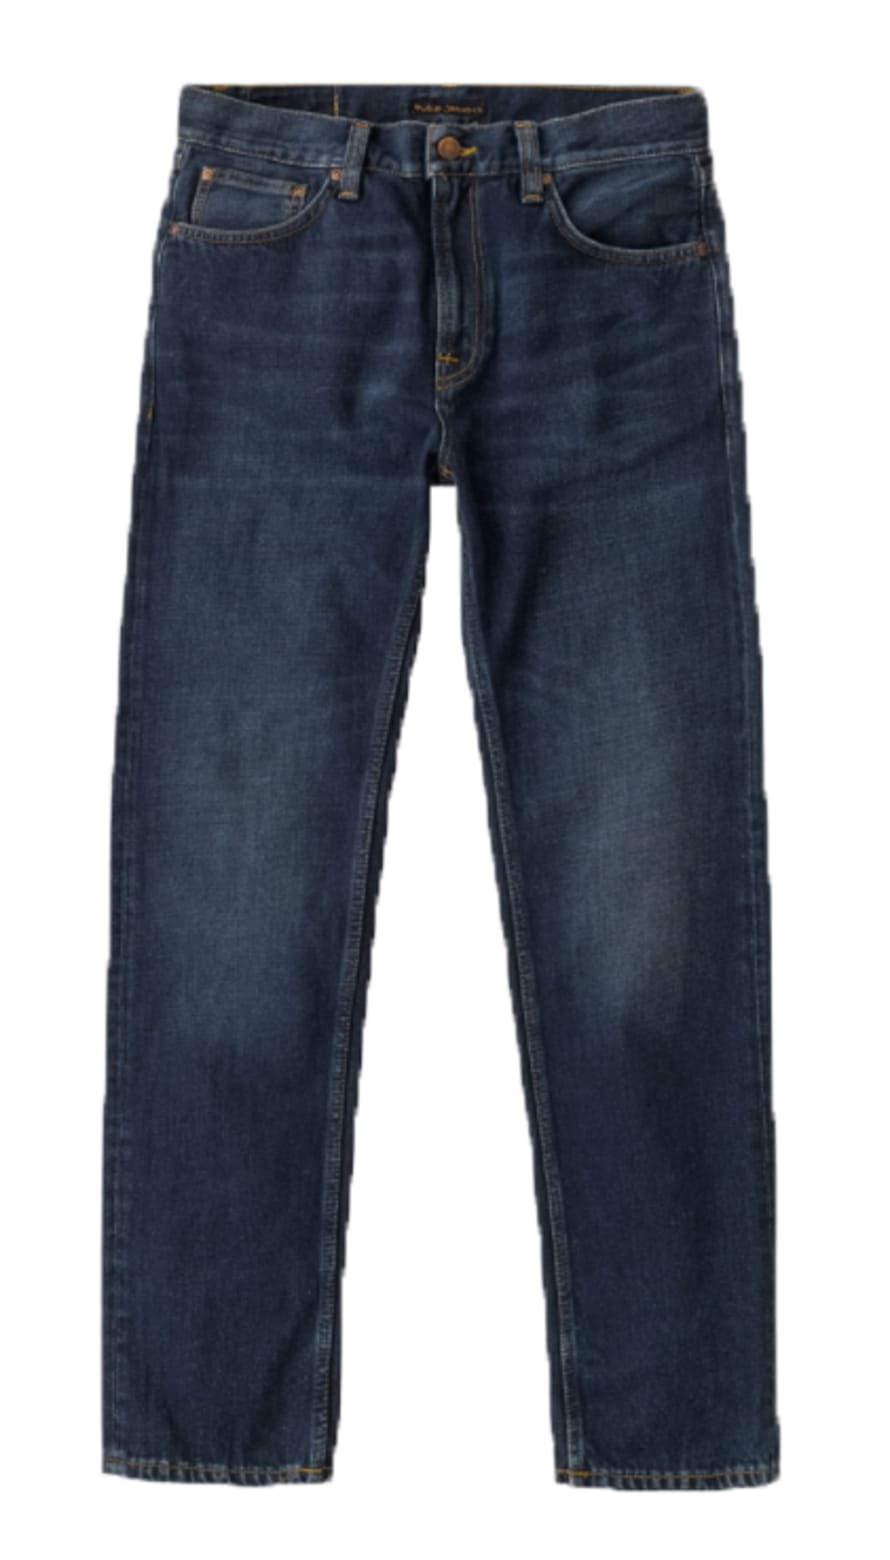 Nudie Jeans Gritty Jackson Regular Fit Jeans Mutual Worn